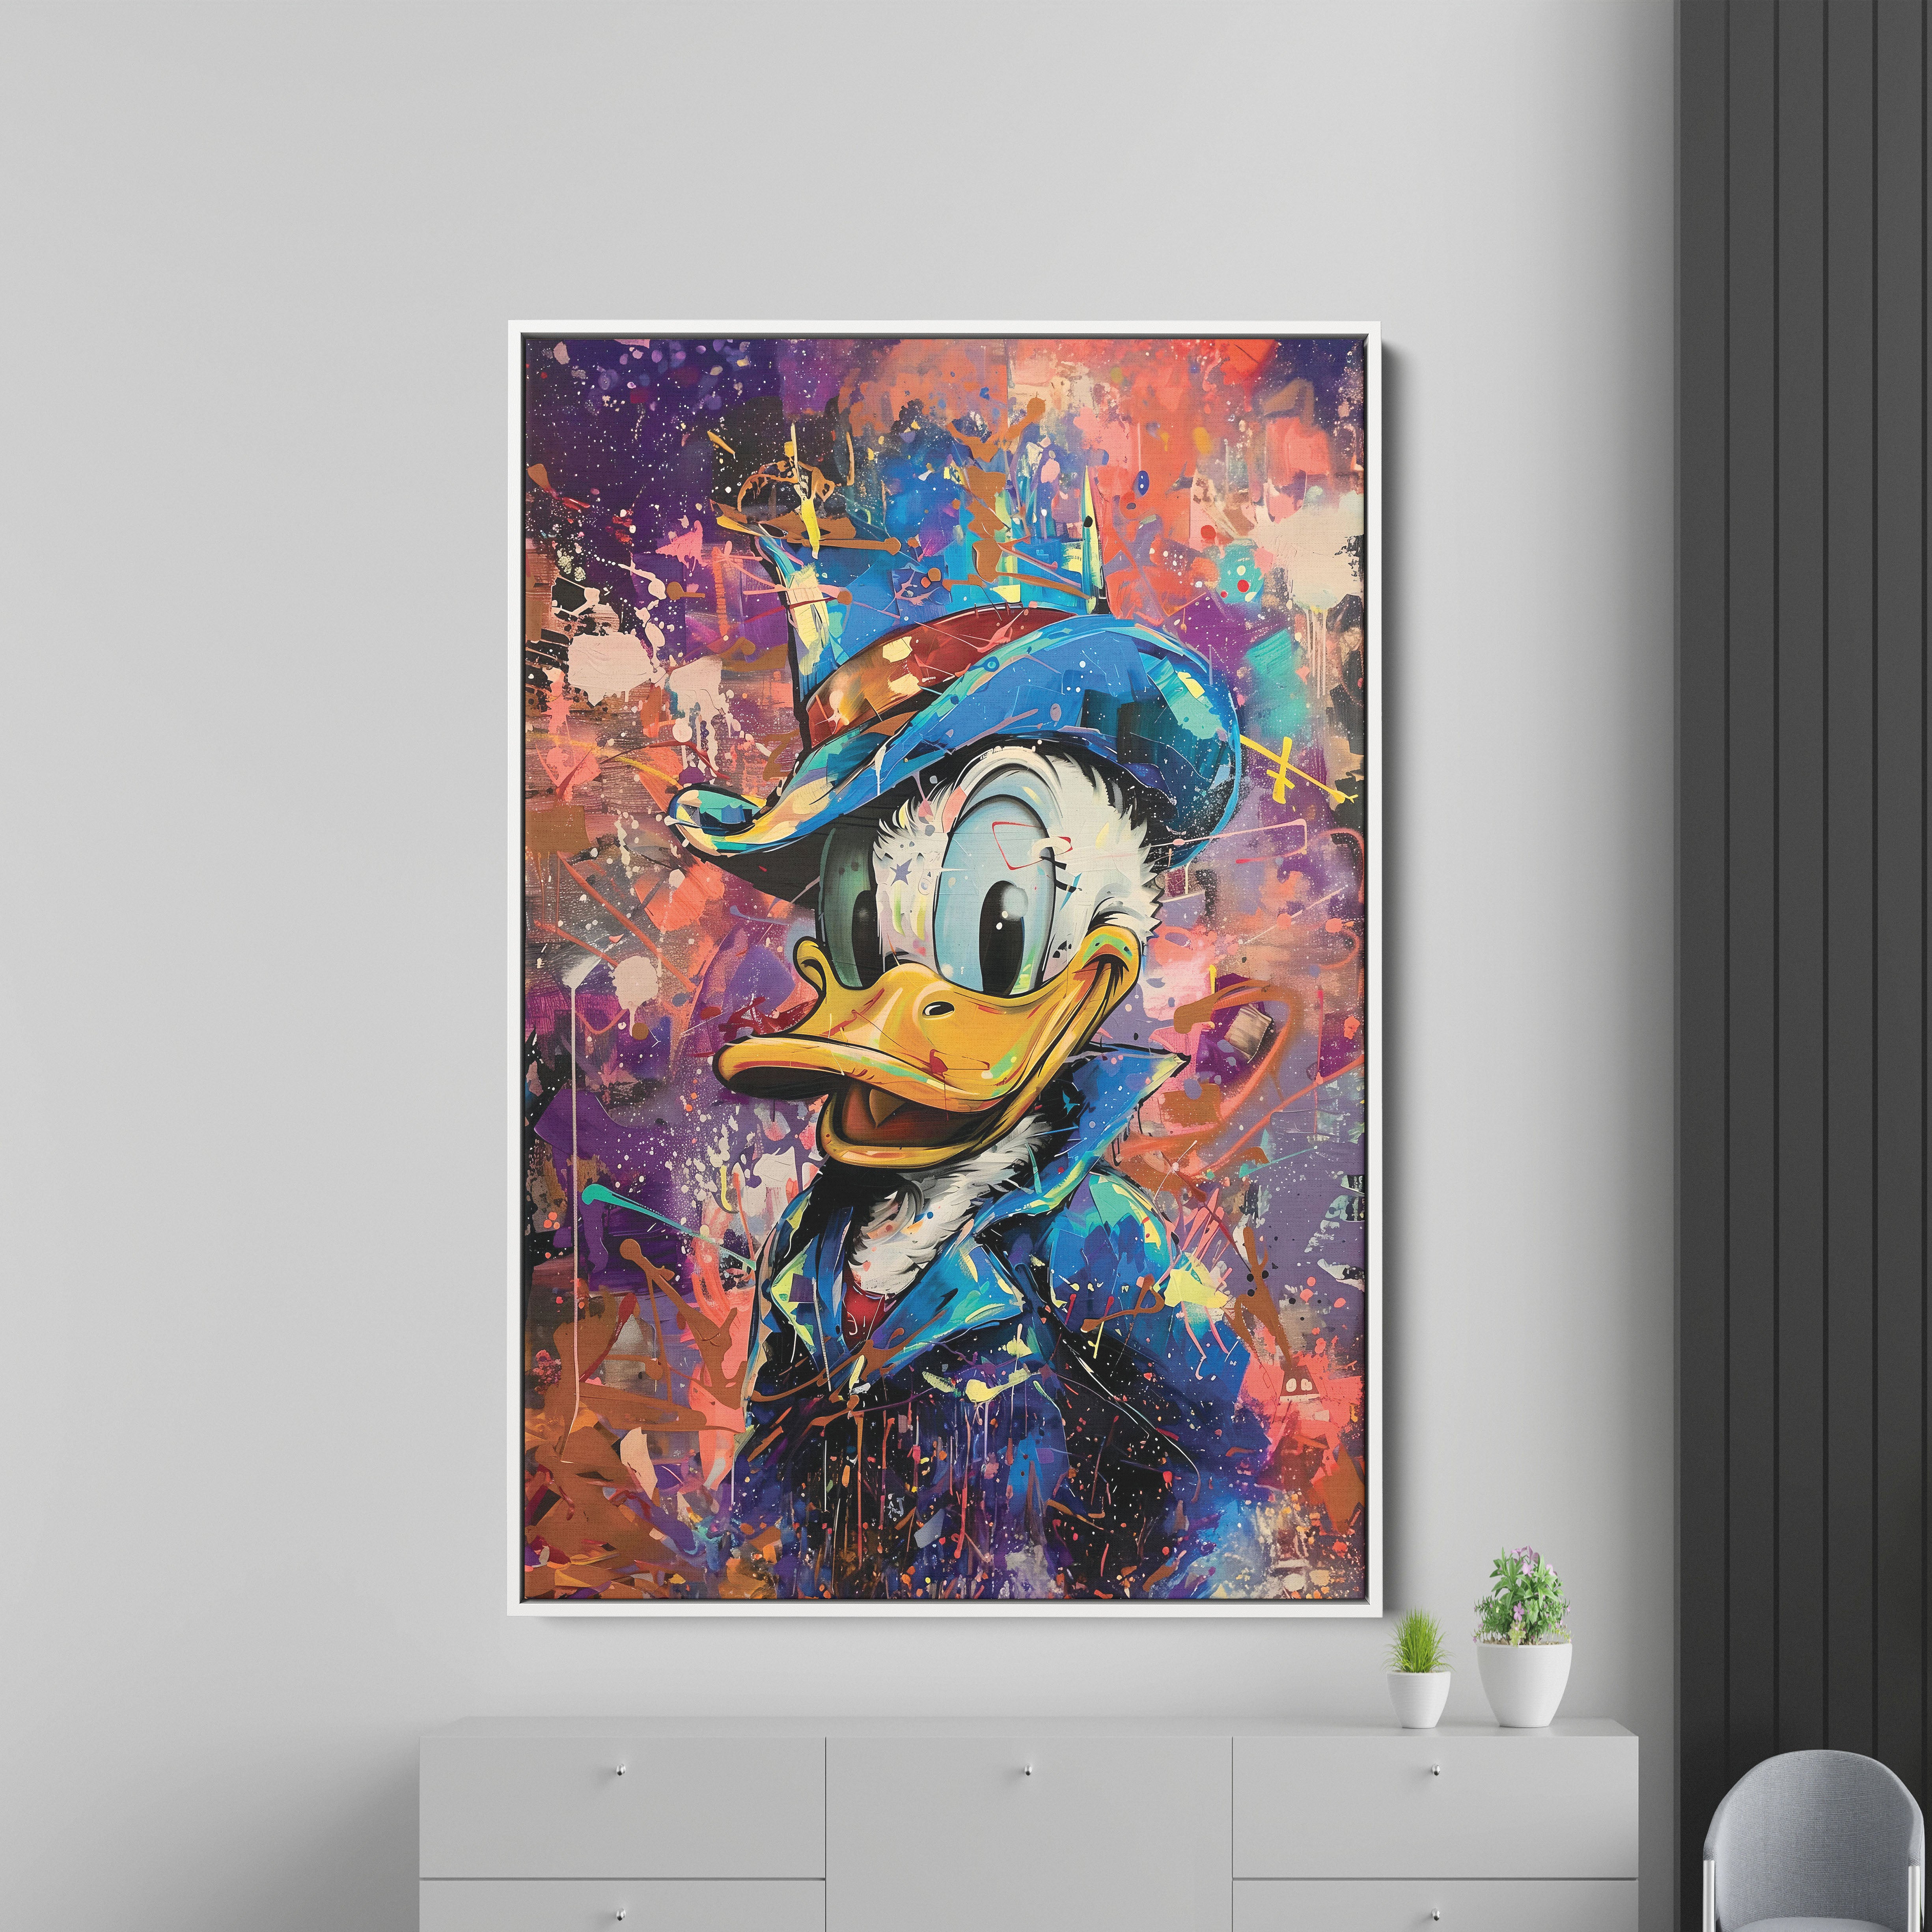 Scrooge Mcduck Pop Art Canvas Wall Painting